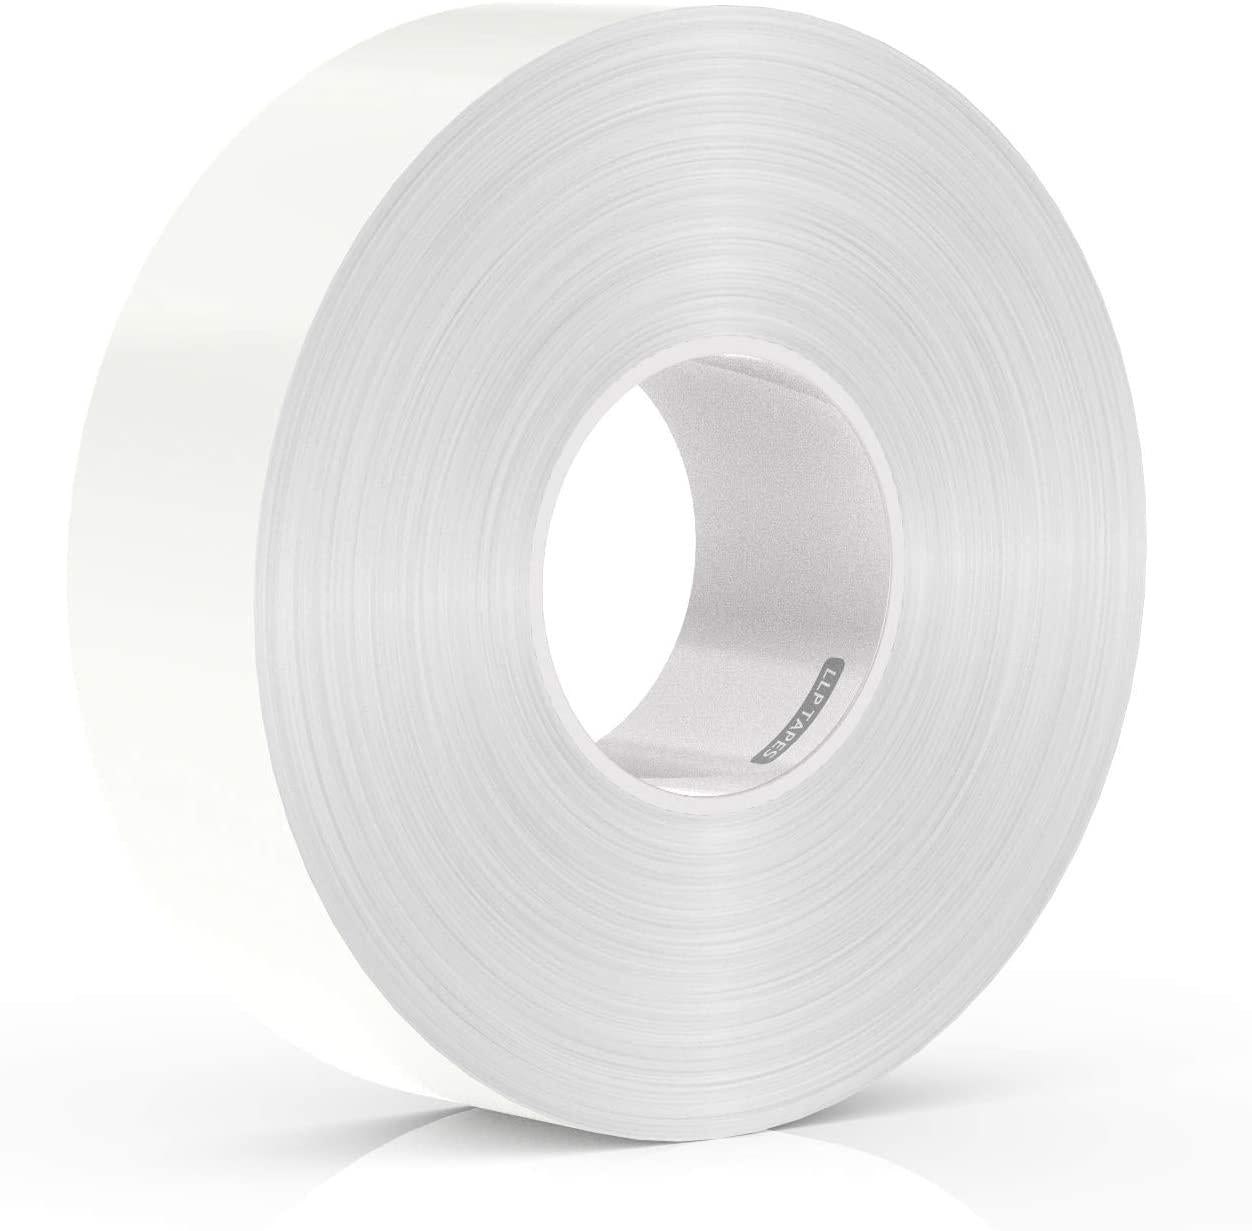 LLPT, LLPT Double Sided White Carpet Tape 1.5 Inches x 20 Yards Multiple Residue Free Removable Heavy Duty Adhesive for Area Rugs Hardwood Floors Stair Treads Carpet (CT152)